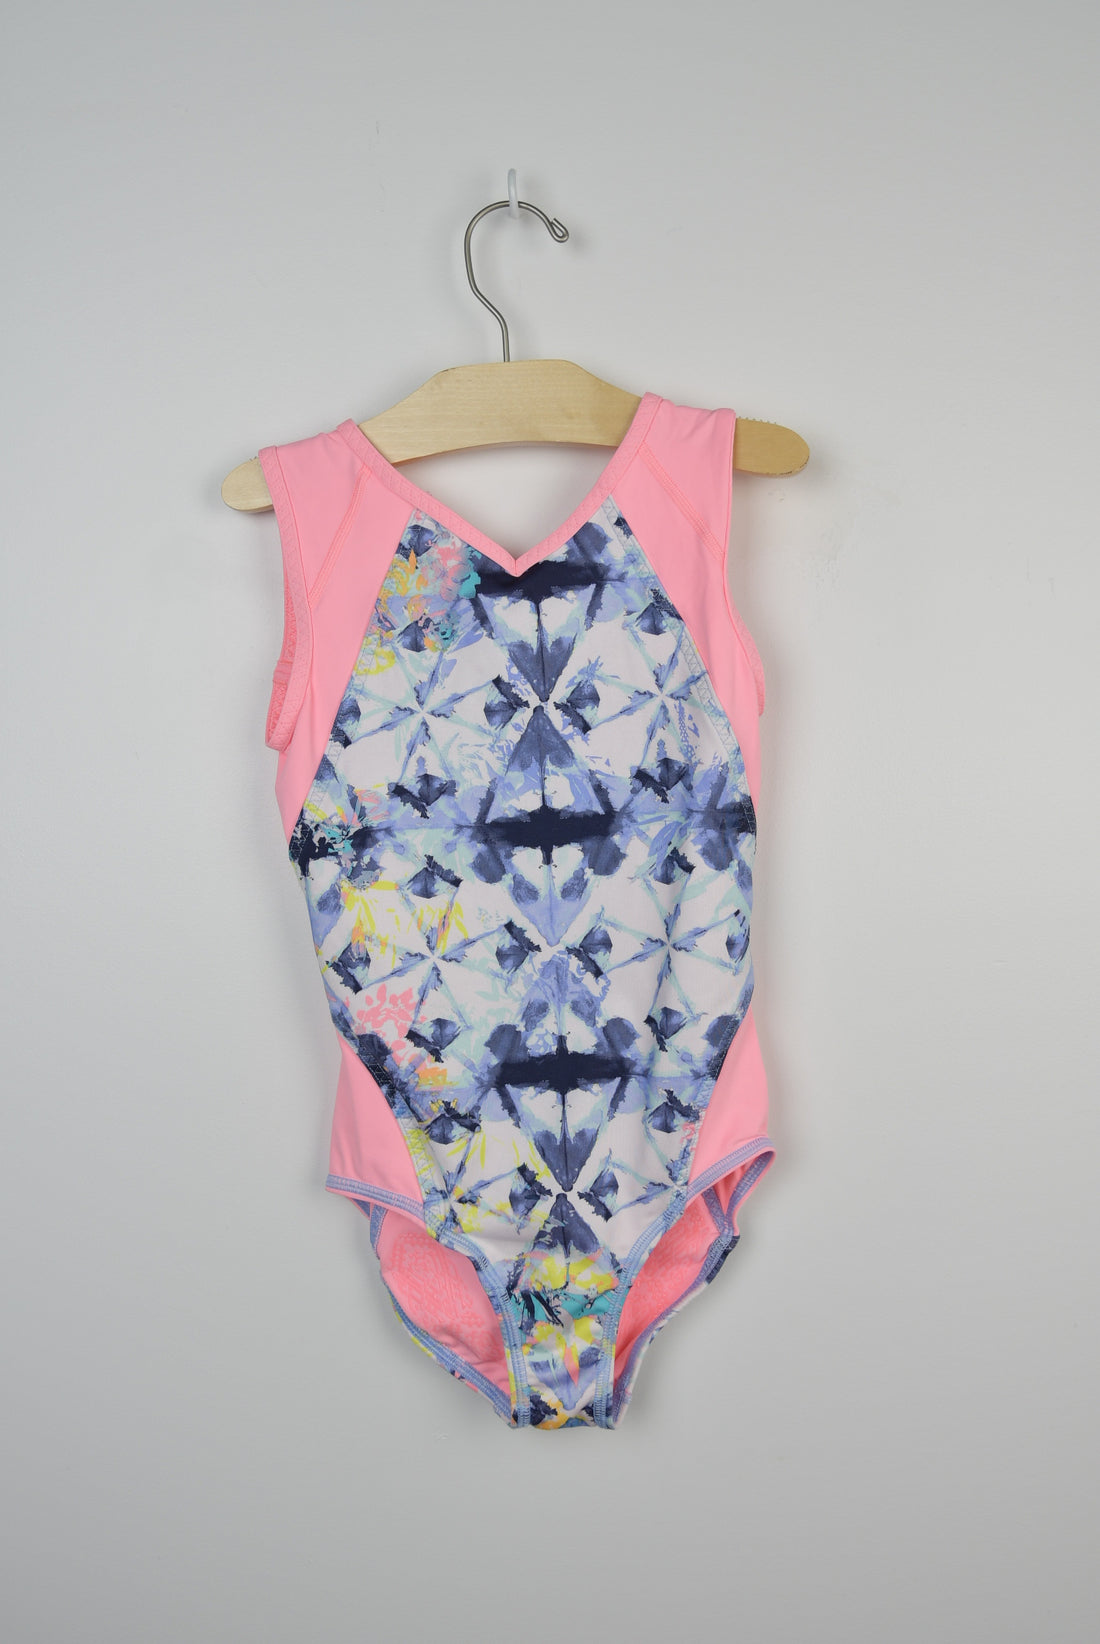 Ivivva Patterned Body Suit (8Y)